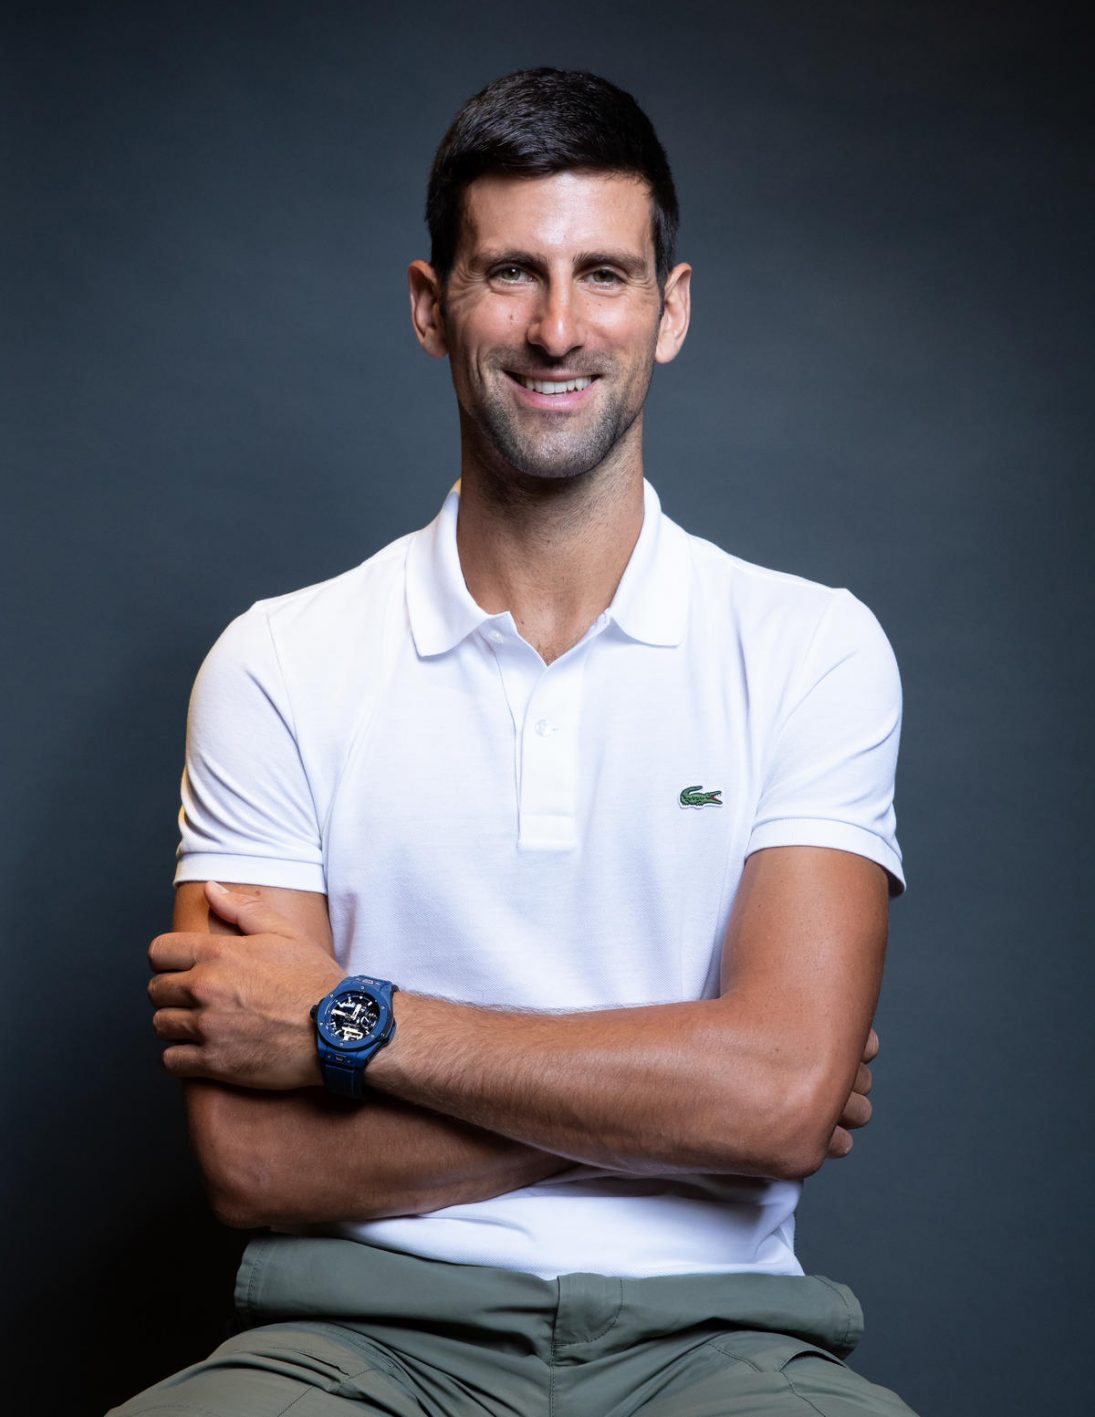 Prior to the US Open, Hublot has signed Novak Djokovic as its brand ...